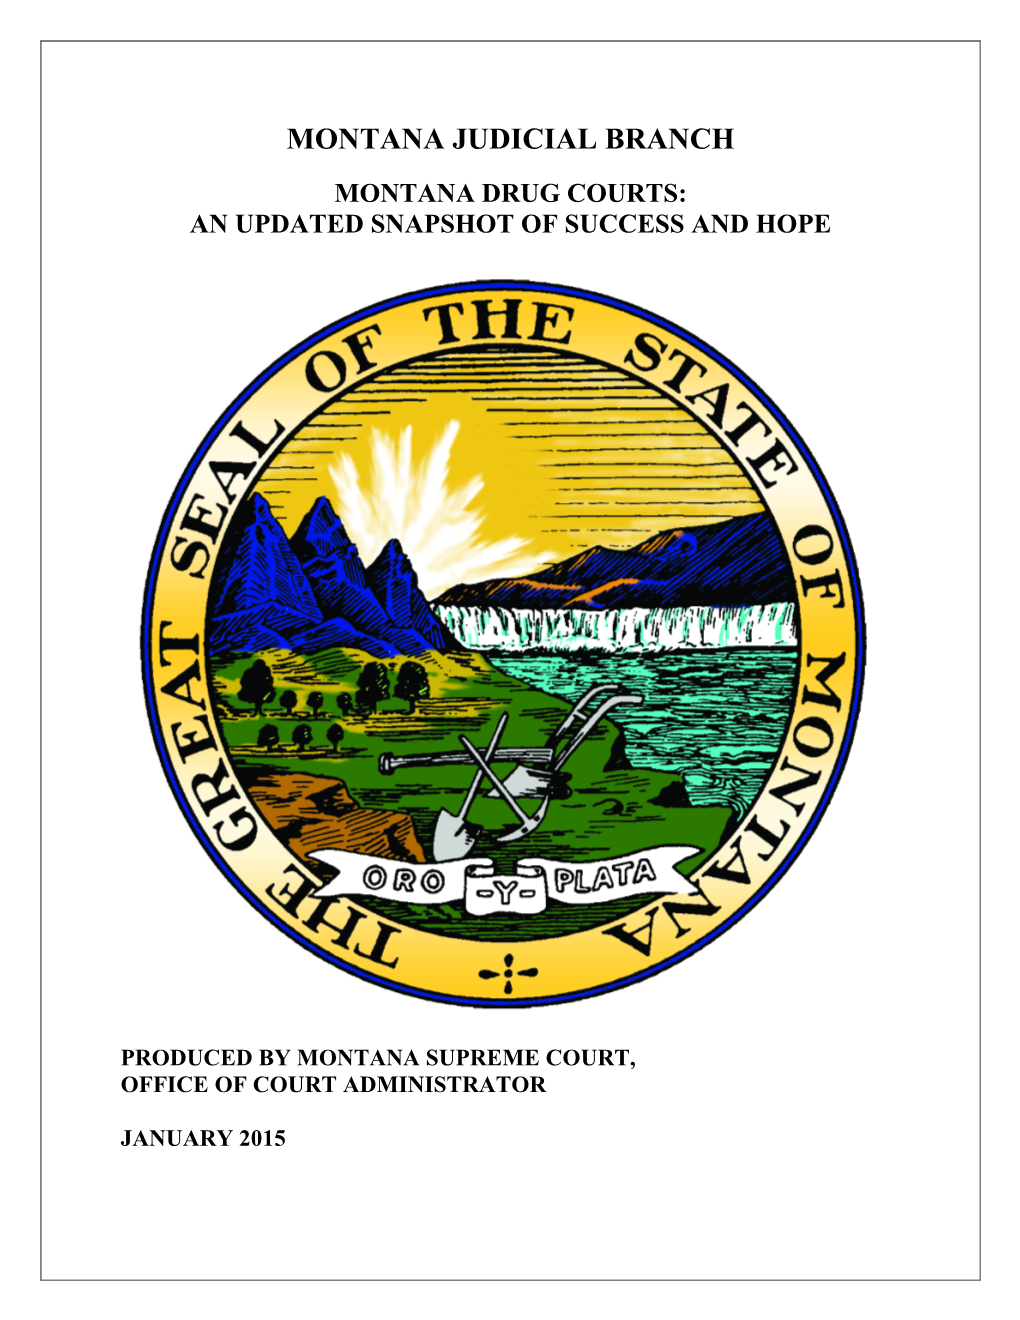 Montana Judicial Branch Montana Drug Courts: an Updated Snapshot of Success and Hope